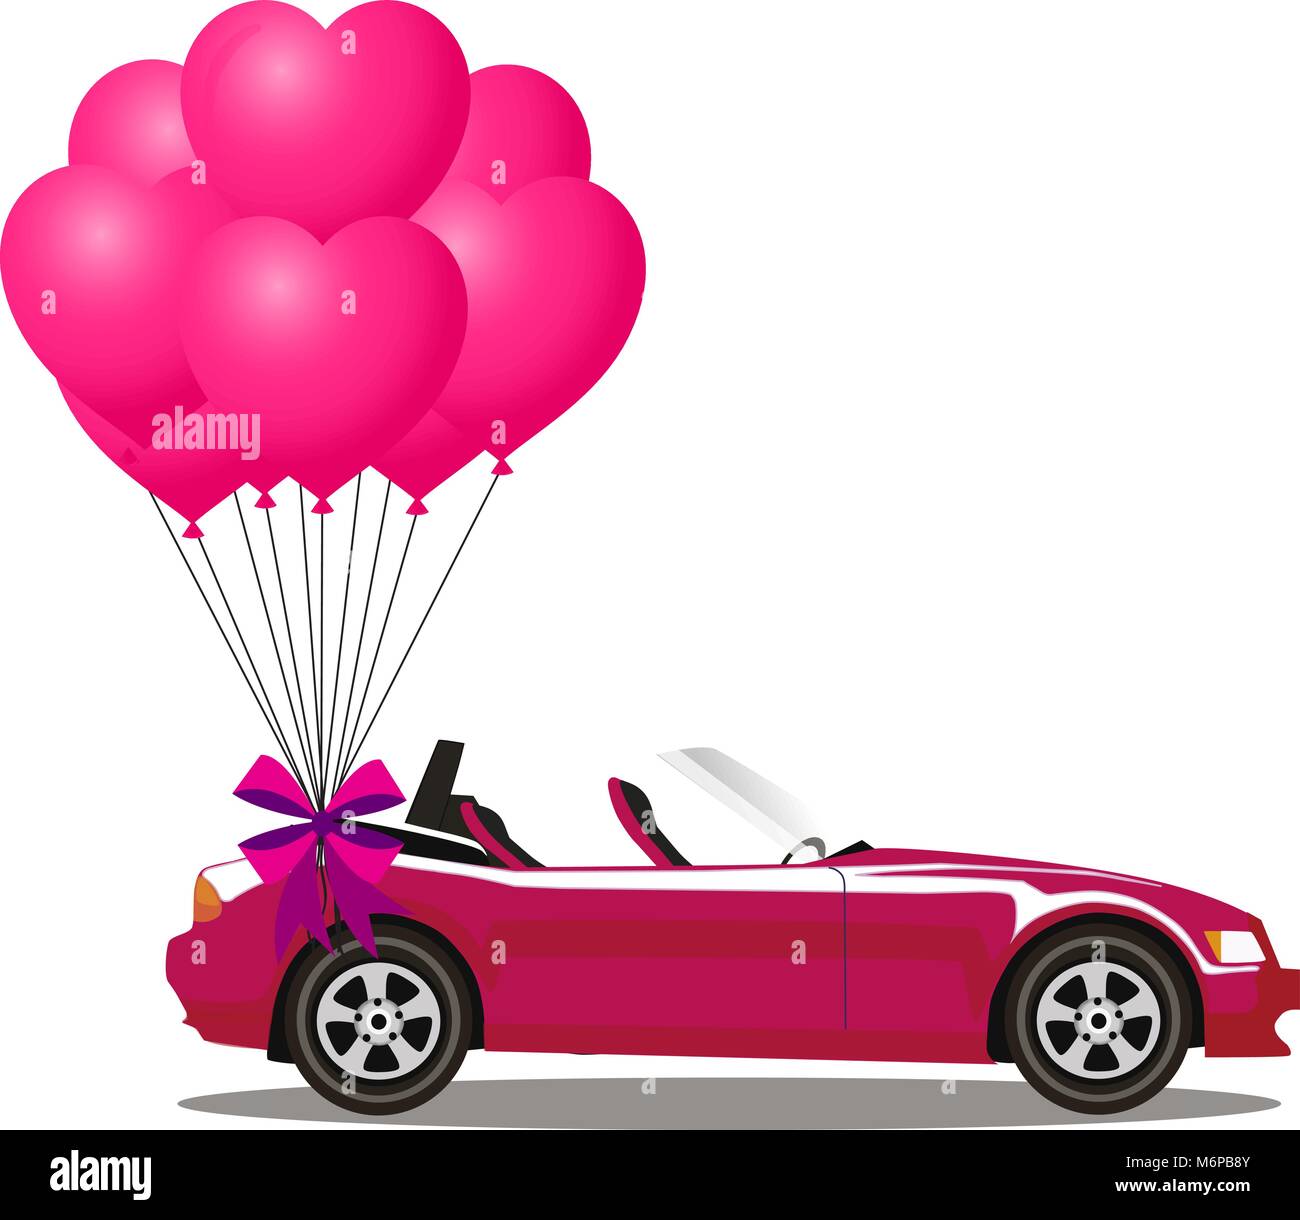 Pink modern opened cartoon cabriolet car with bunch of rose helium heart shaped balloons with festive bow isolated on white background. Sports car. Ve Stock Vector